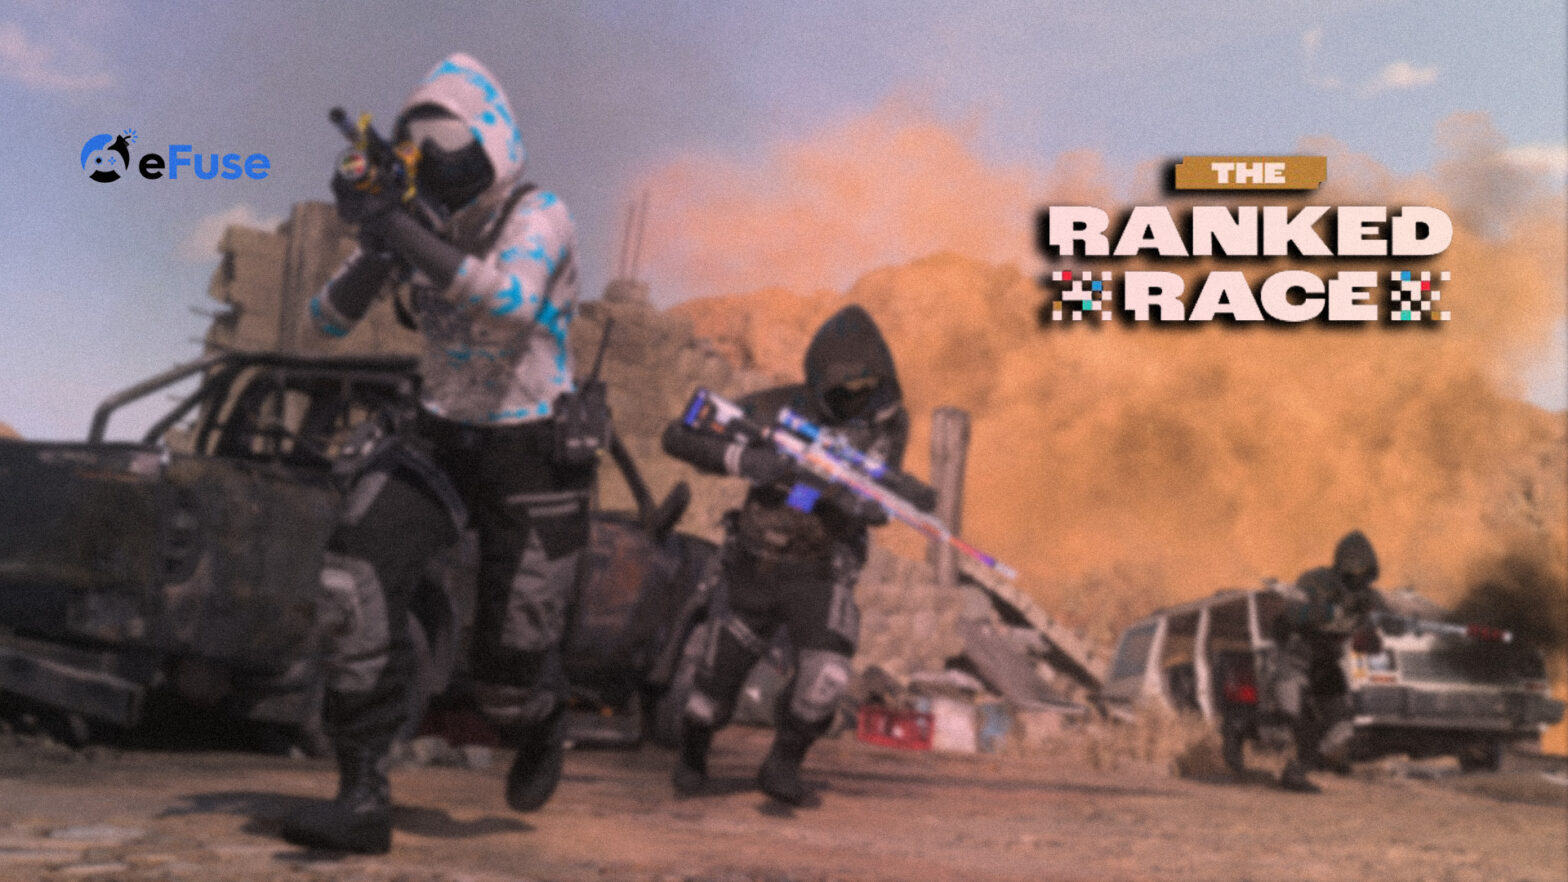 Call of Duty grinders get ready for $25K Ranked Race tournament 